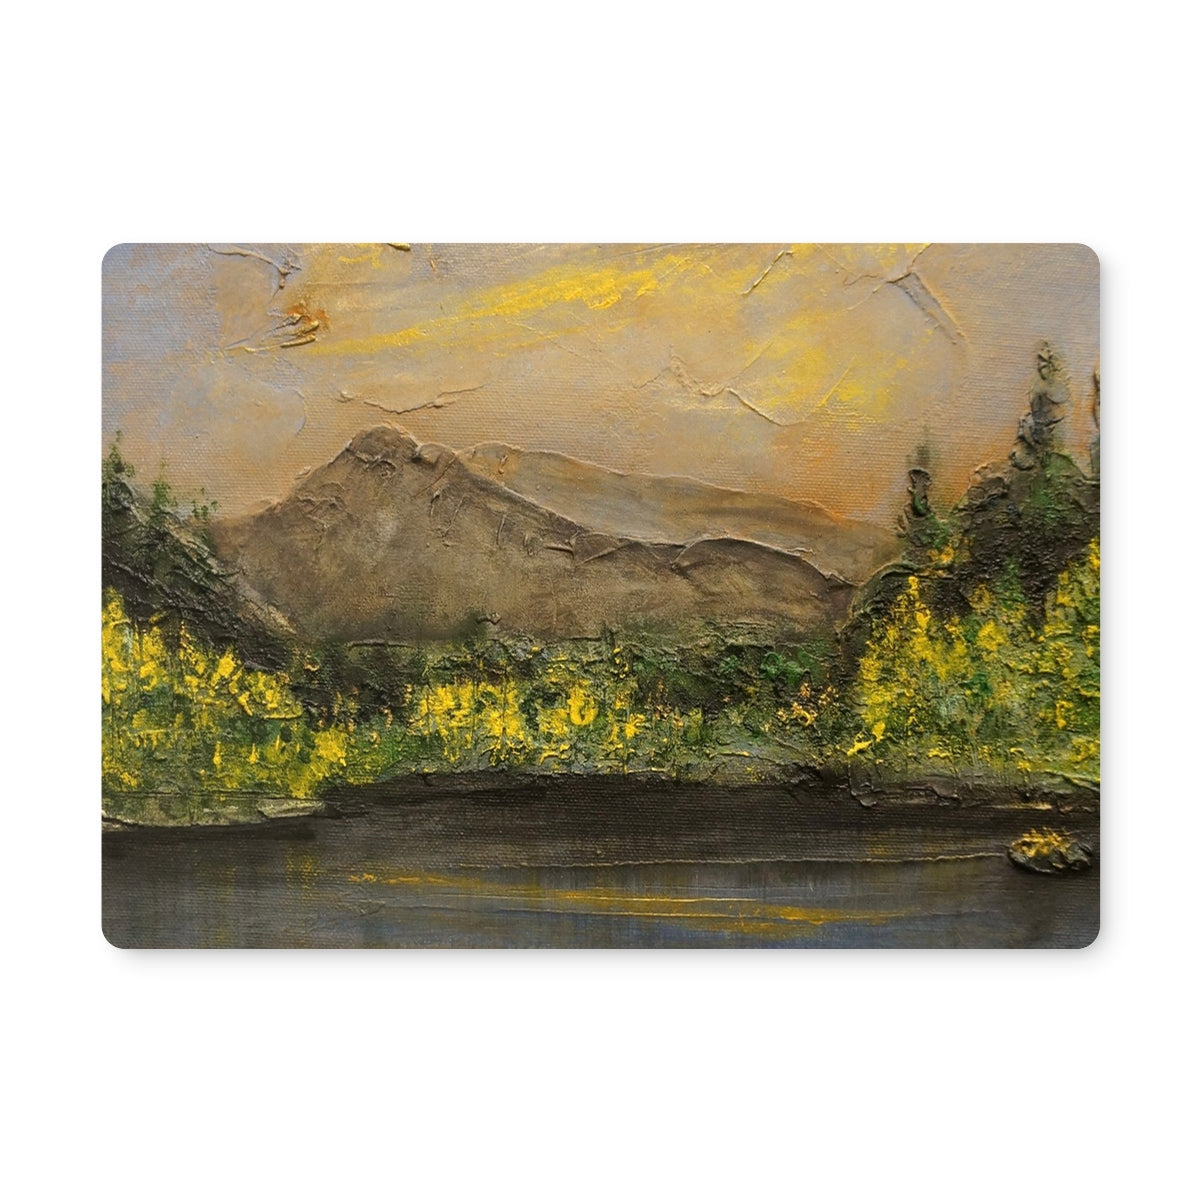 Glencoe Lochan Dusk Art Gifts Placemat-Placemats-Scottish Lochs & Mountains Art Gallery-Single Placemat-Paintings, Prints, Homeware, Art Gifts From Scotland By Scottish Artist Kevin Hunter